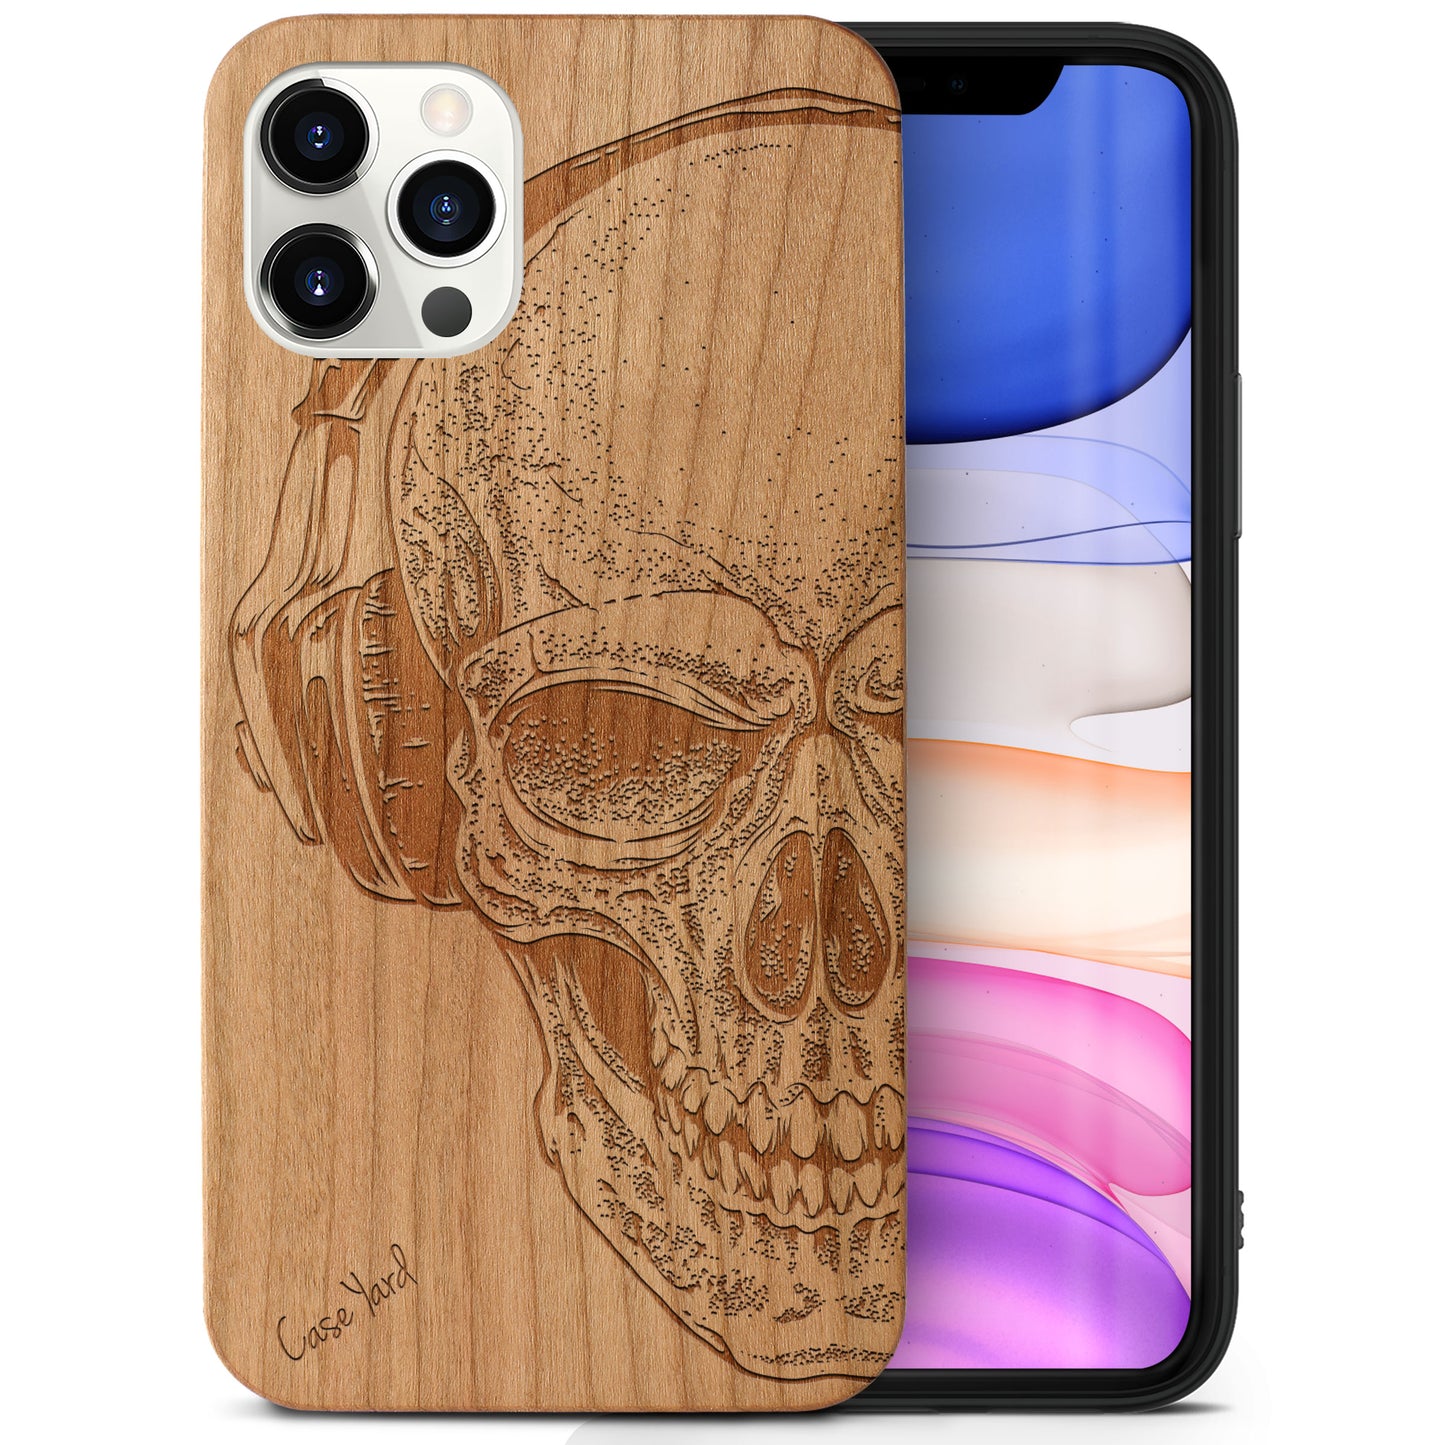 Wooden Cell Phone Case Cover, Laser Engraved case for iPhone & Samsung phone Headphone Skull Wood Design